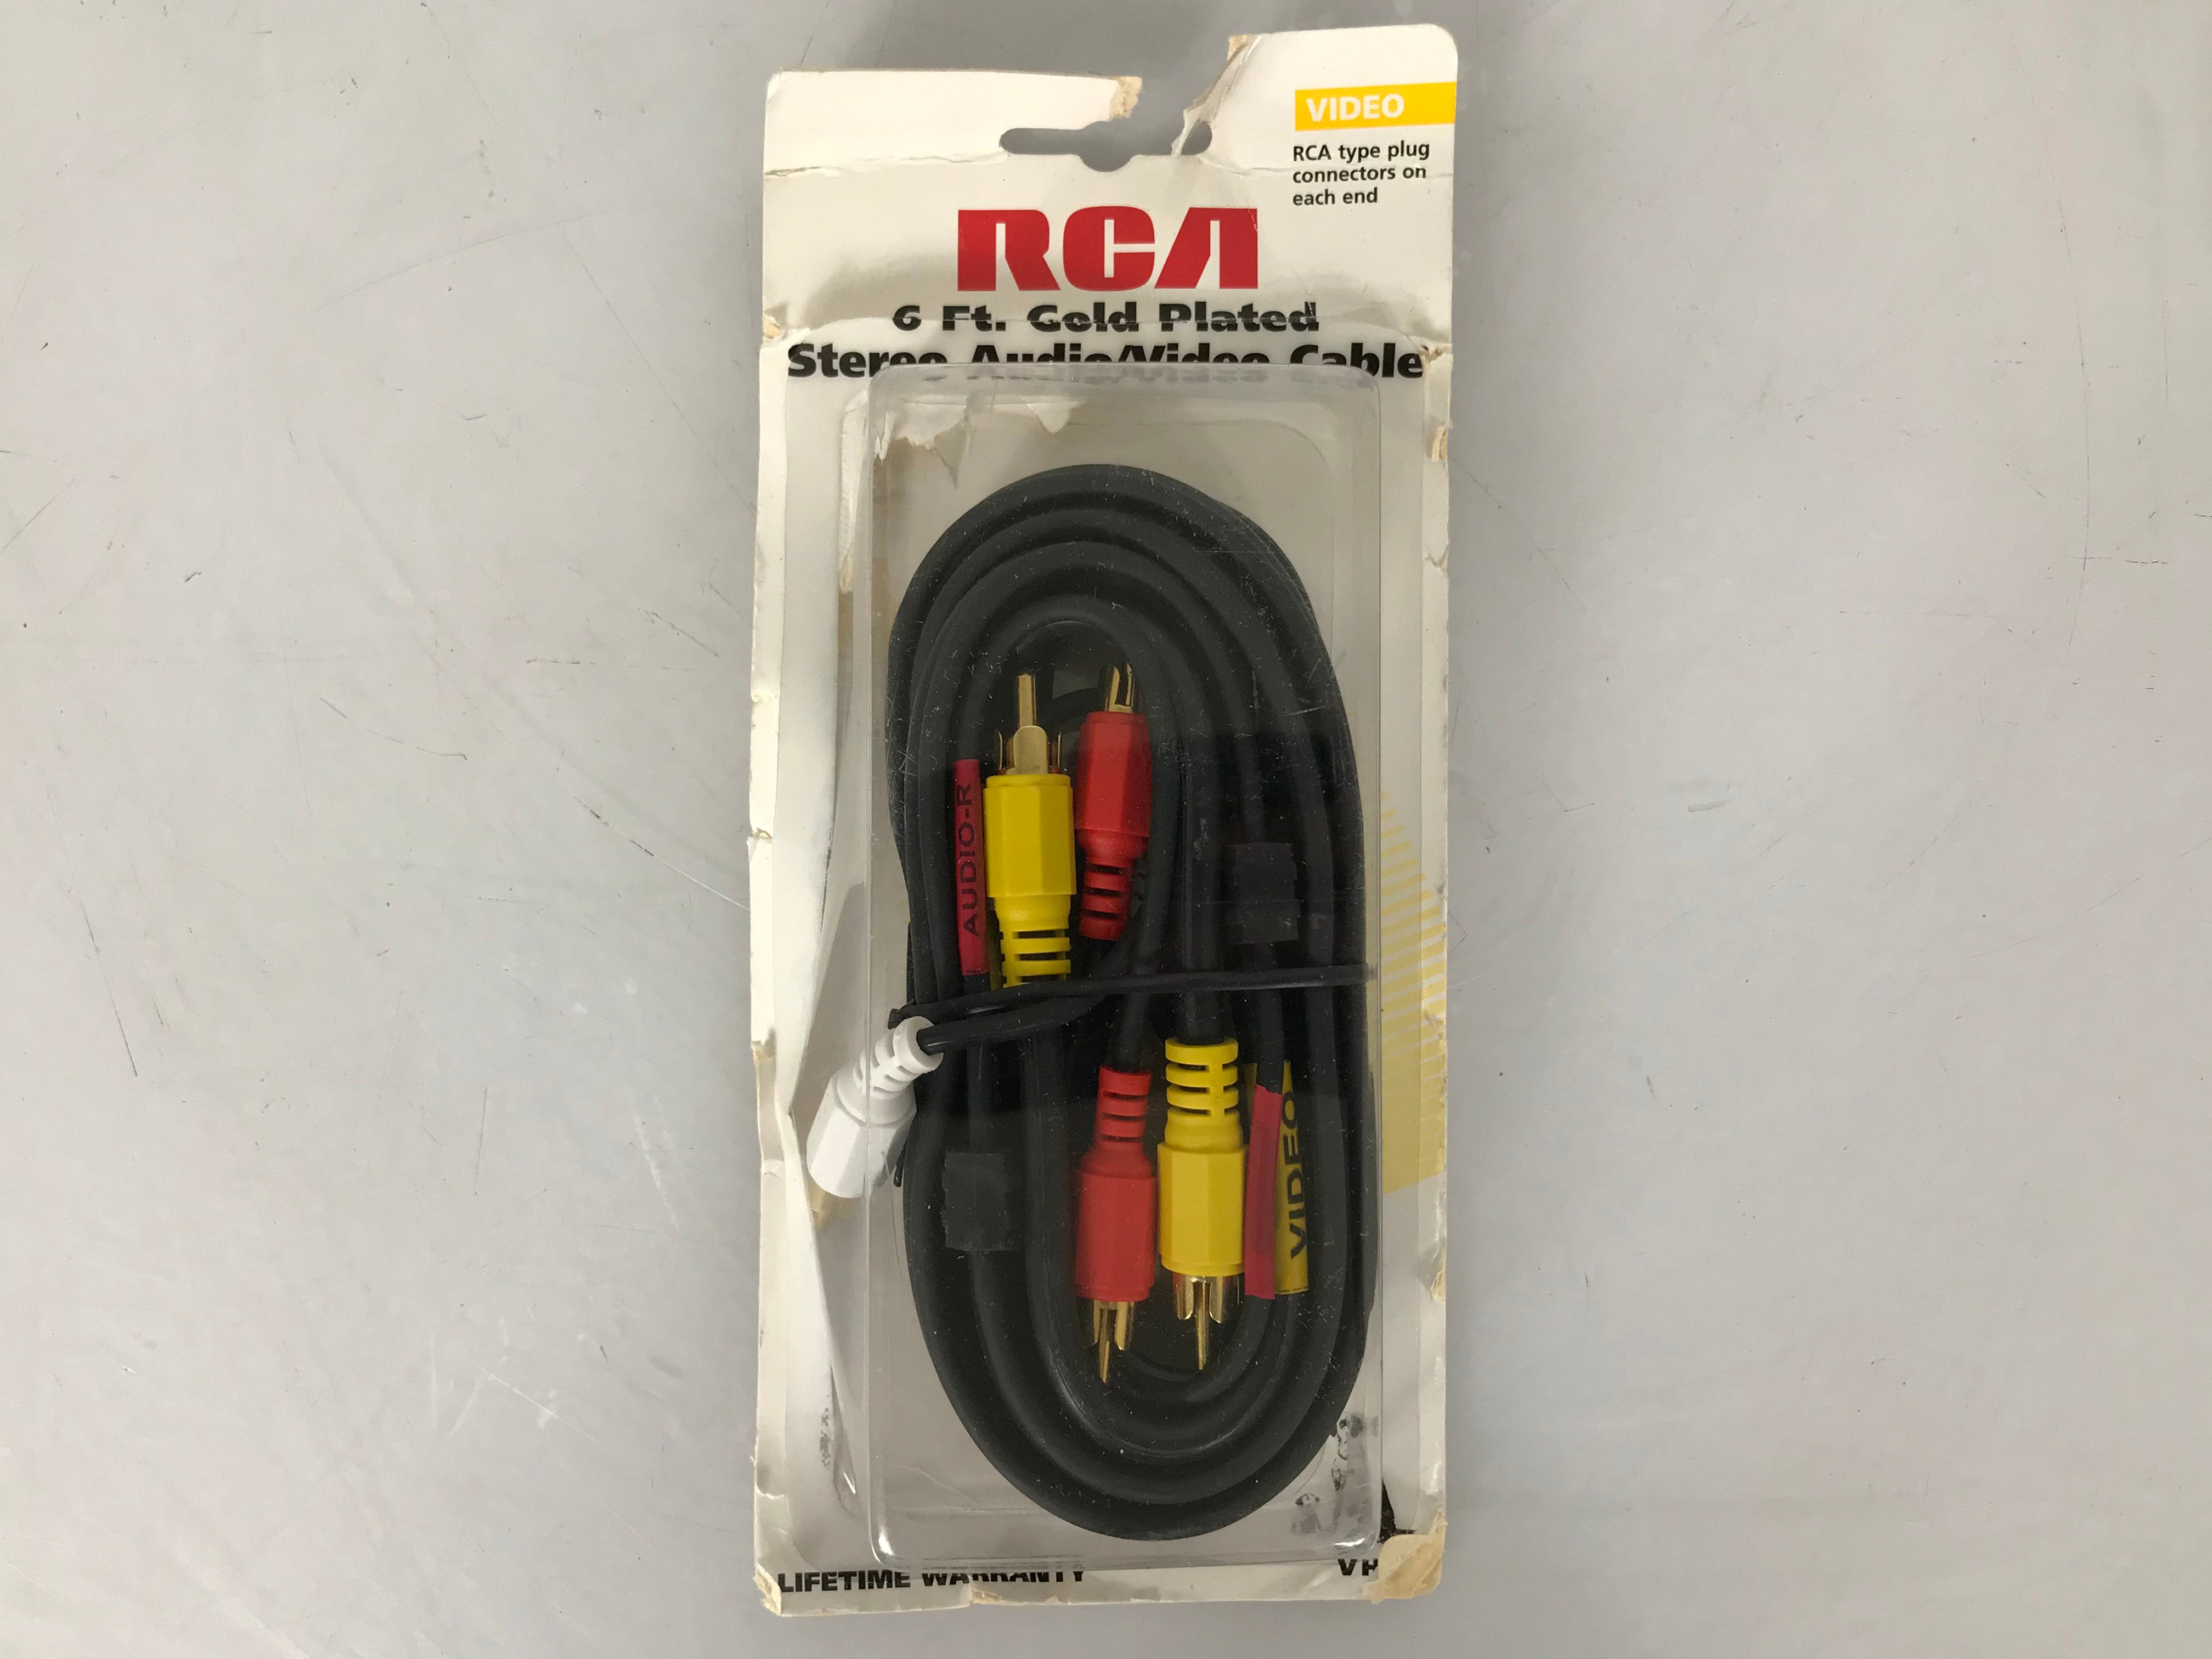 RCA 6 ft Gold Plated Stereo Audio/Video Cable